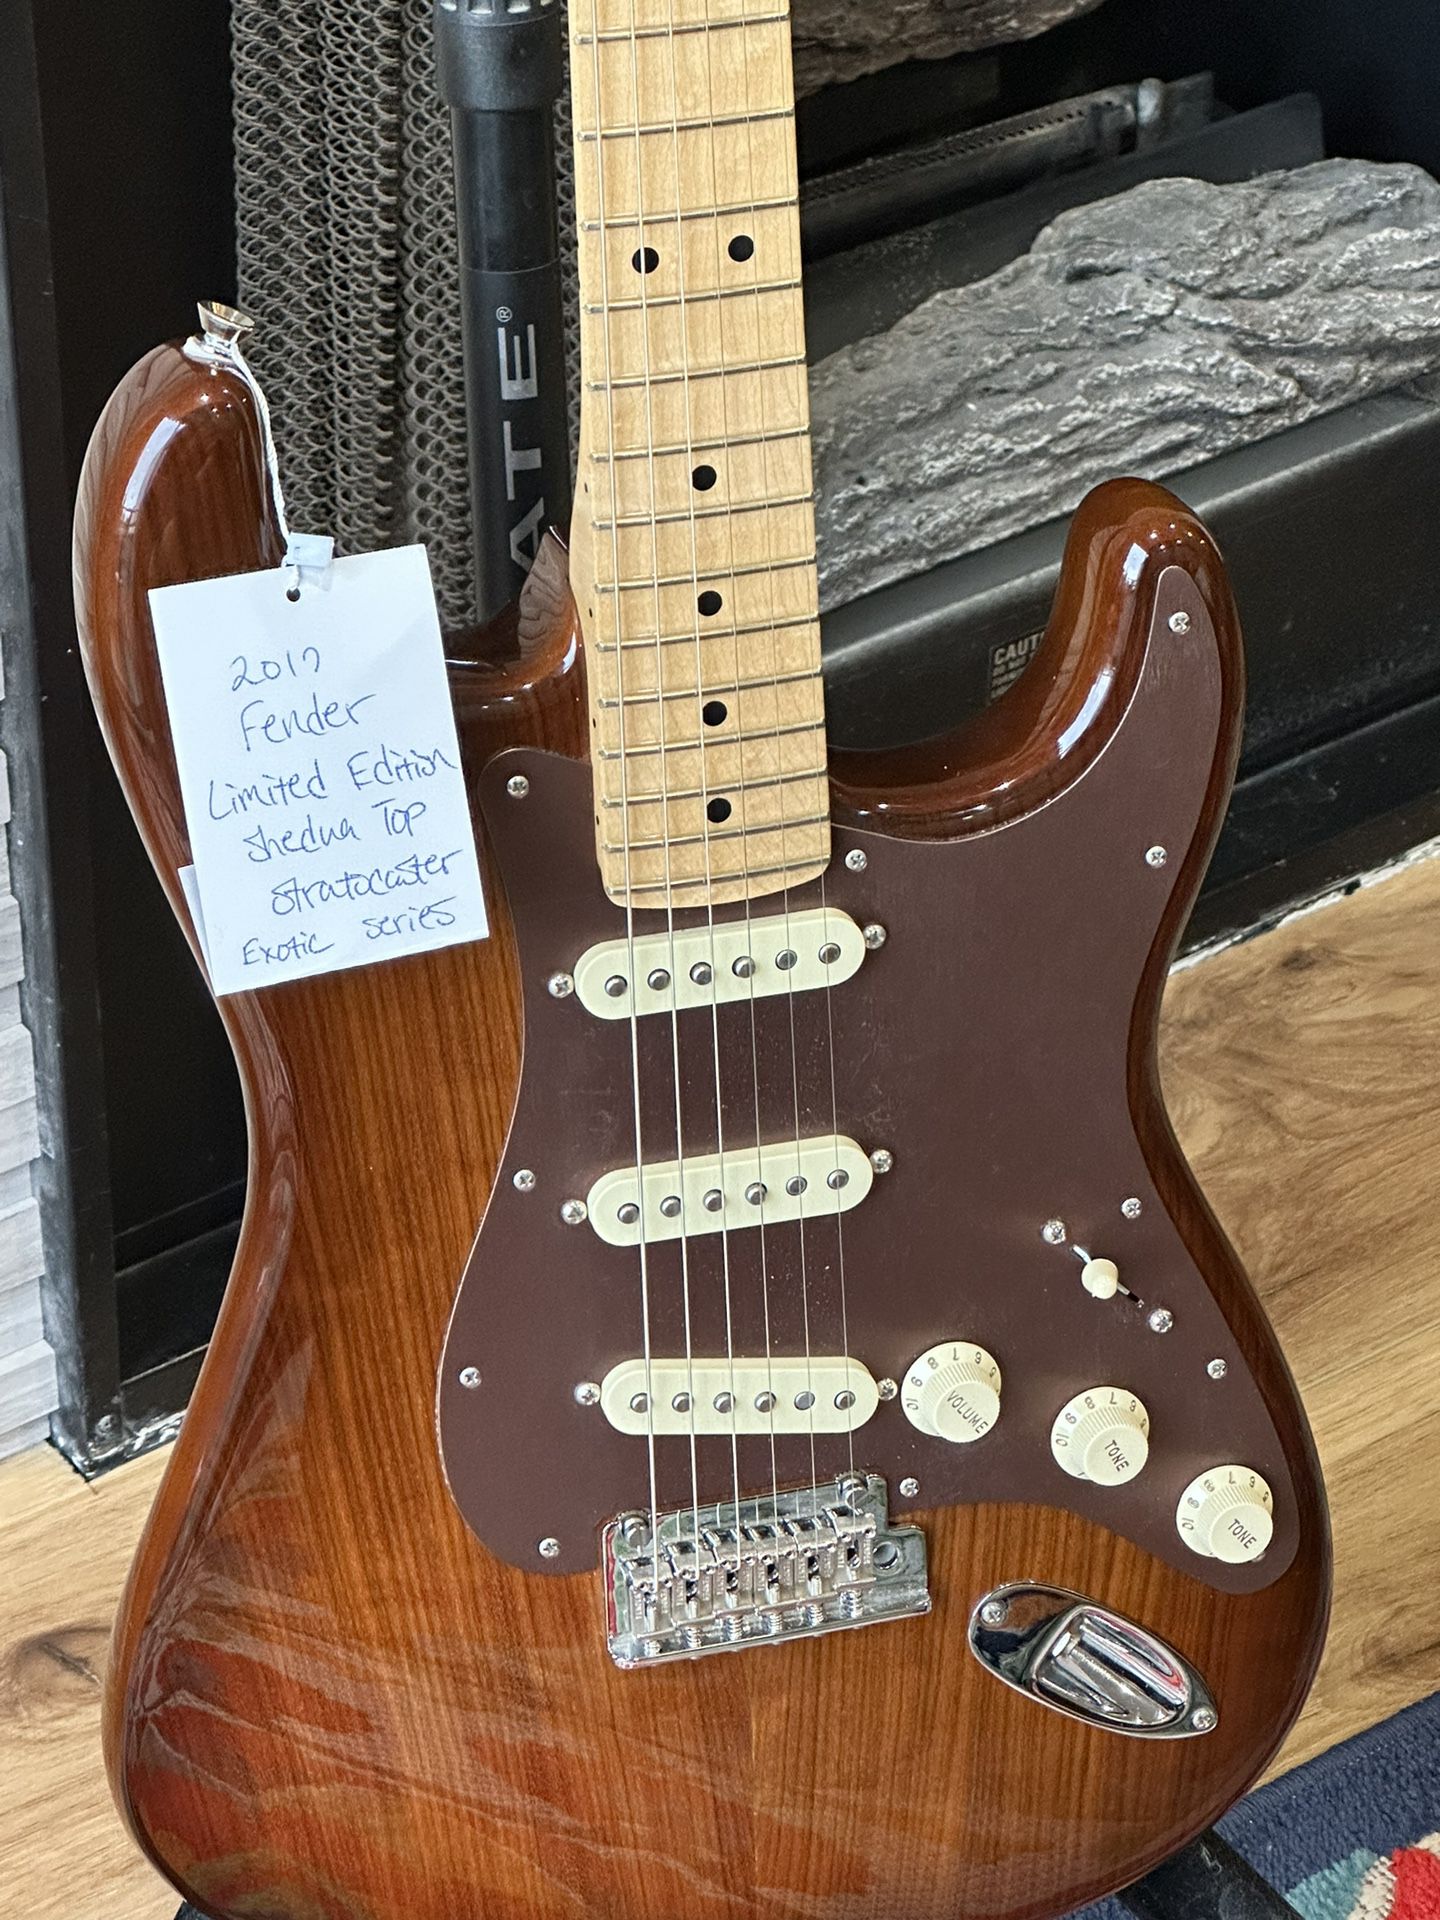 2019 Fender Stratocaster Limited Edition Exotic Series Shedua Top